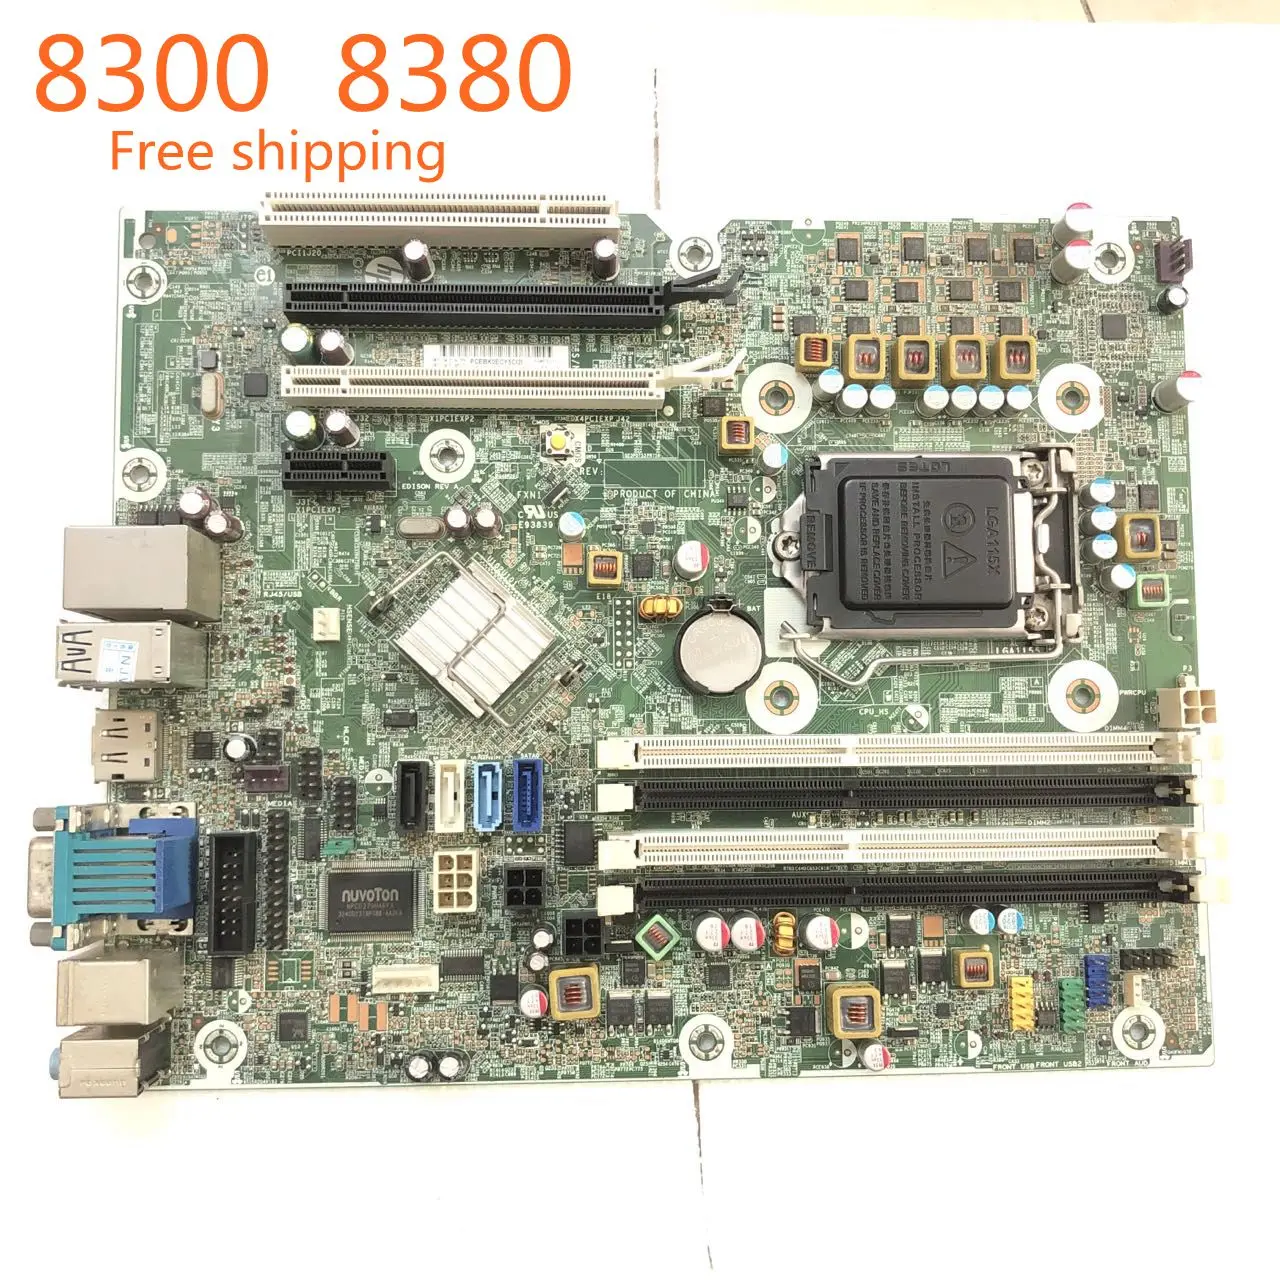 

657094-001 For HP Compaq 8300 8380 Motherboard 656933-001 Q75 LGA1155 Mainboard 100% Tested Fully Work